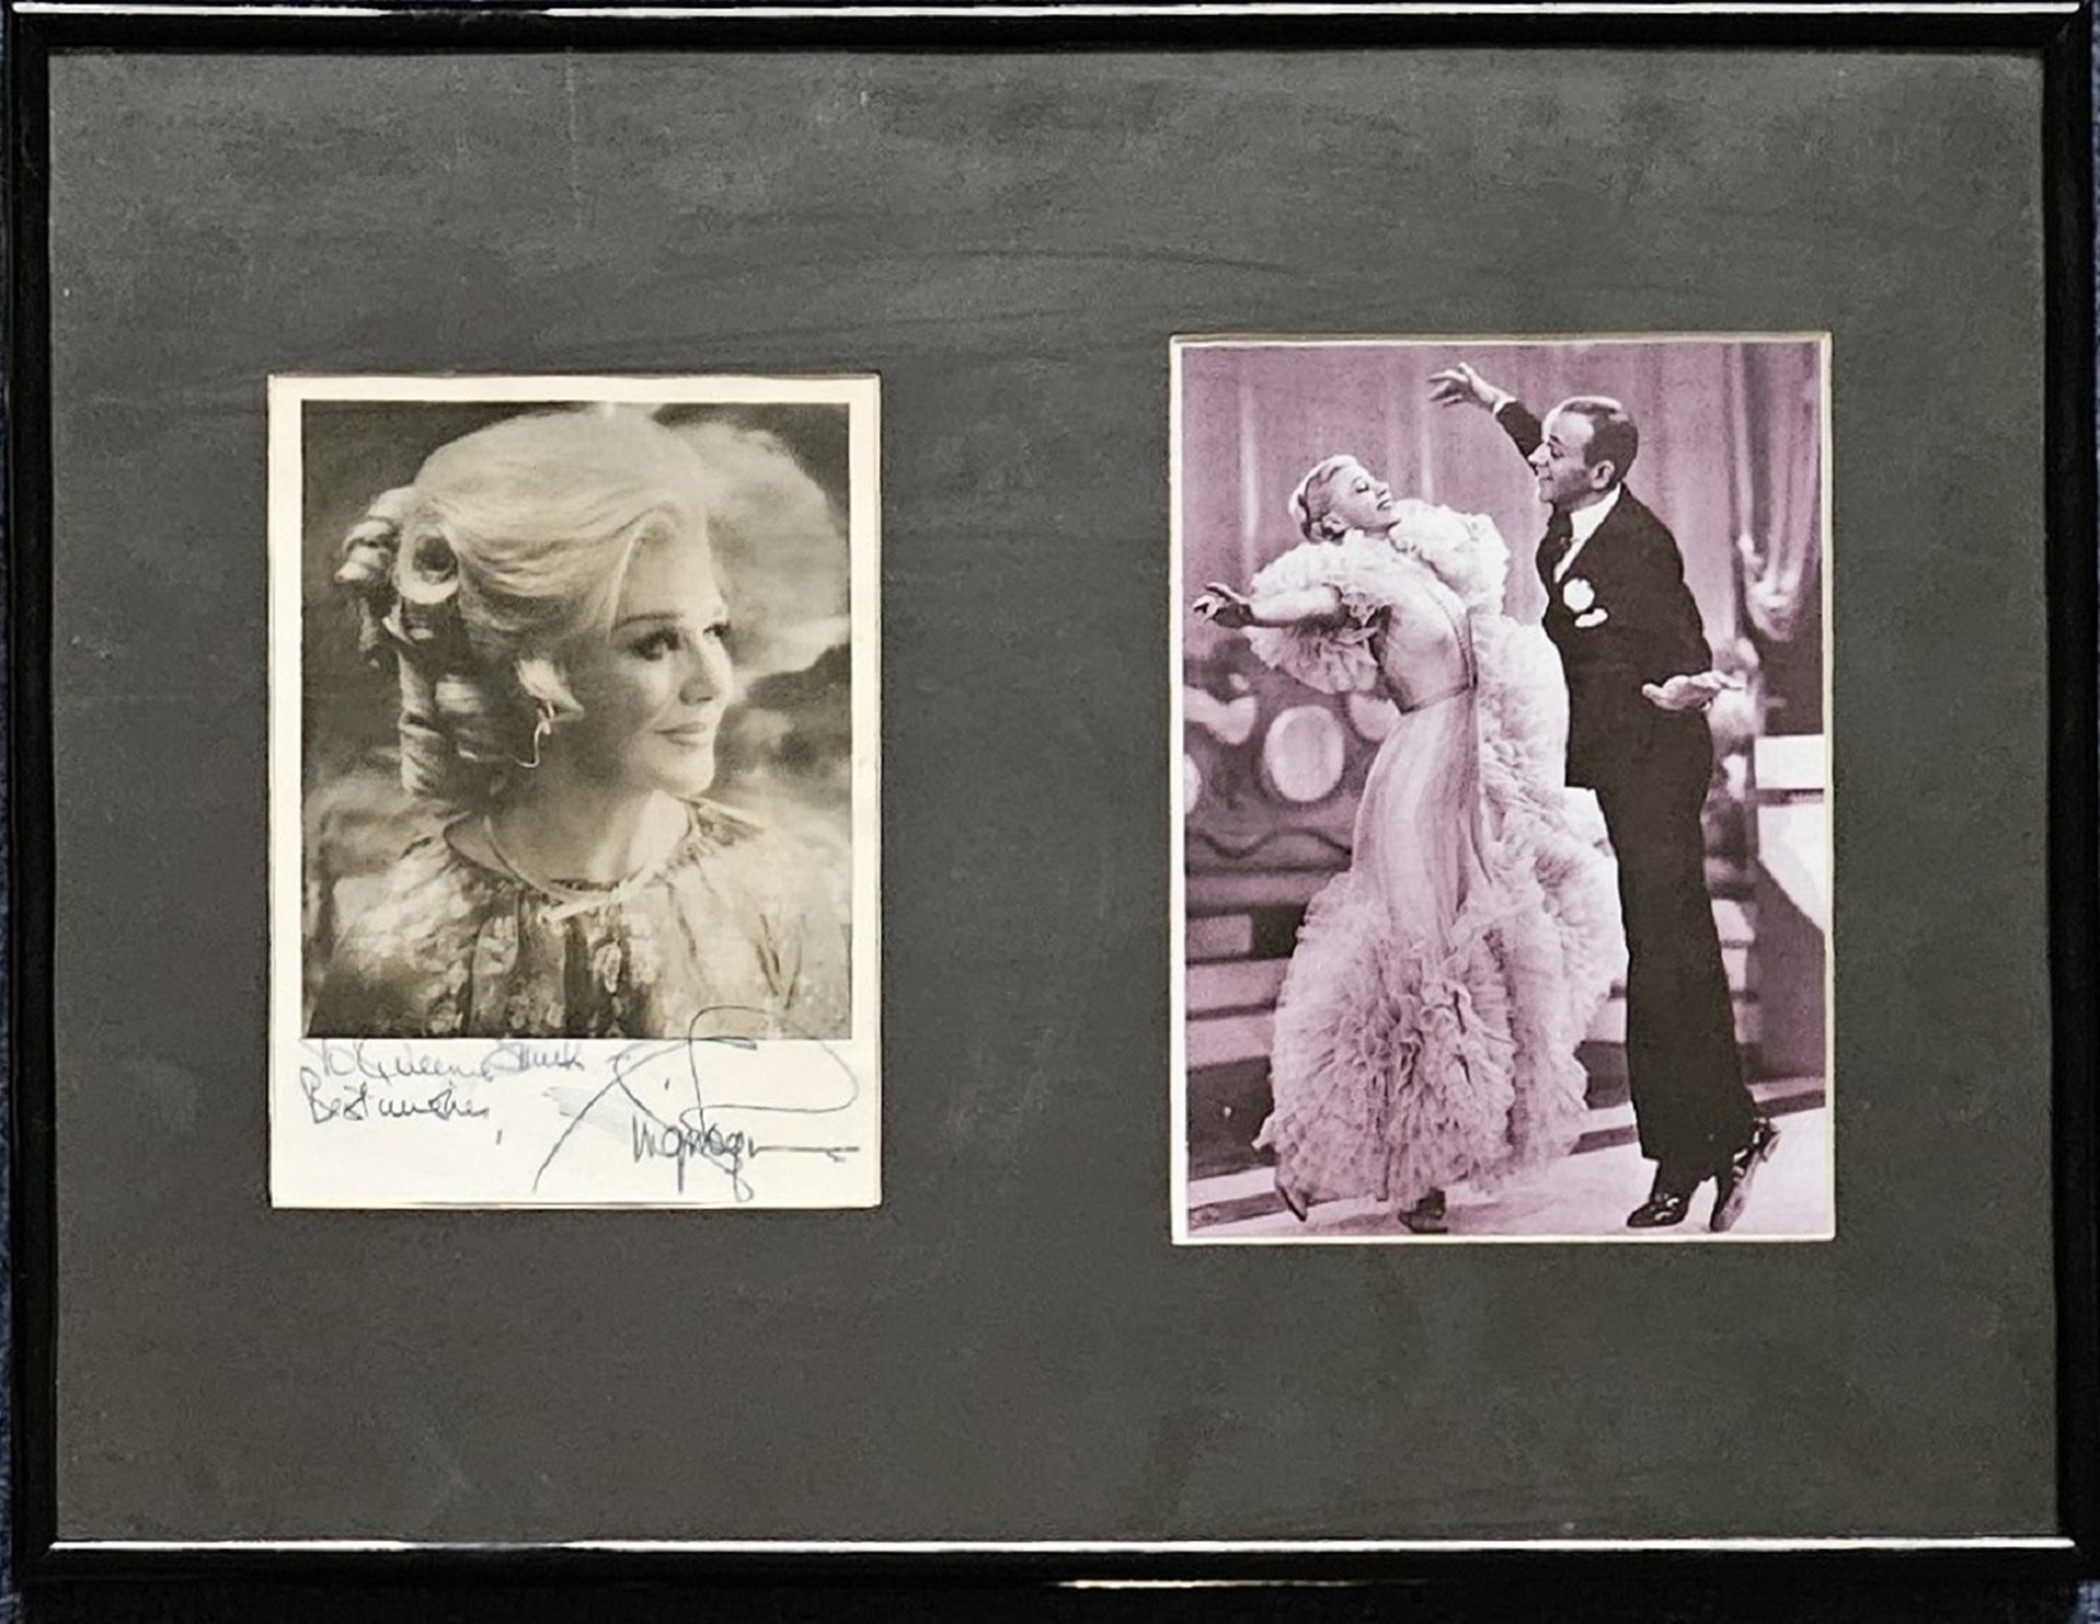 Ginger Rogers signed 16x12 overall size frame with 2 photos inside 1 signed of Rogers and then